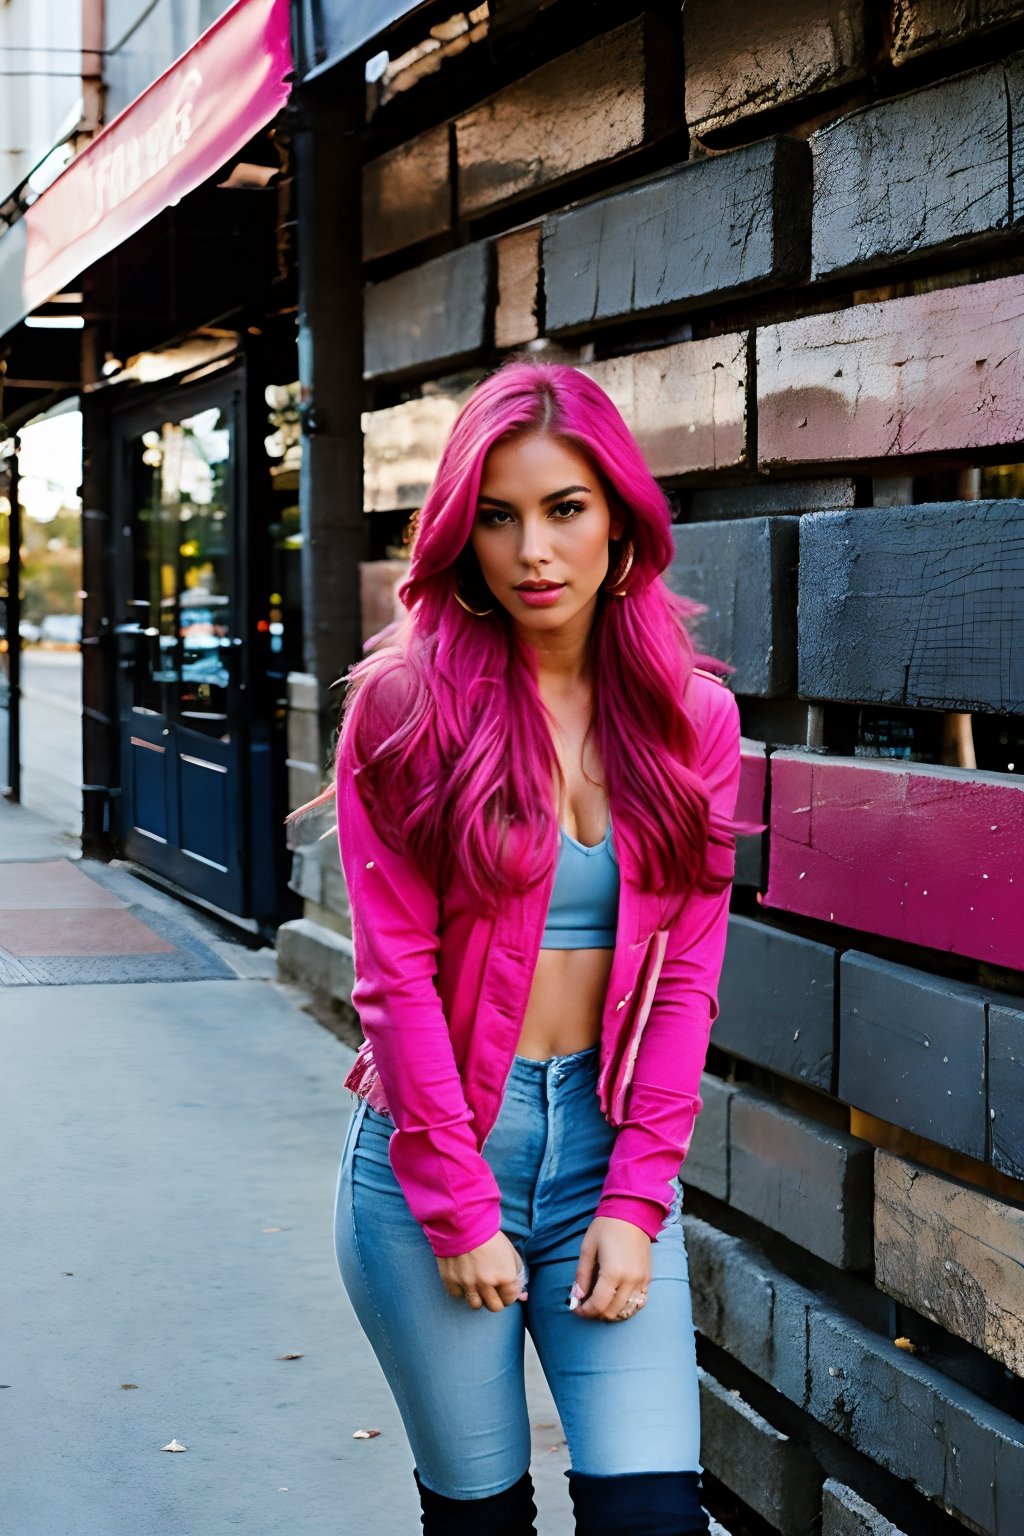 pink hair, long hair with ponytail and fringe, beautiful face, onlyfans model, hot pink lips, pink eyeshadow, wearing cropped denim jacket and tight levis jeans in light blue color,blackbootsnjeans